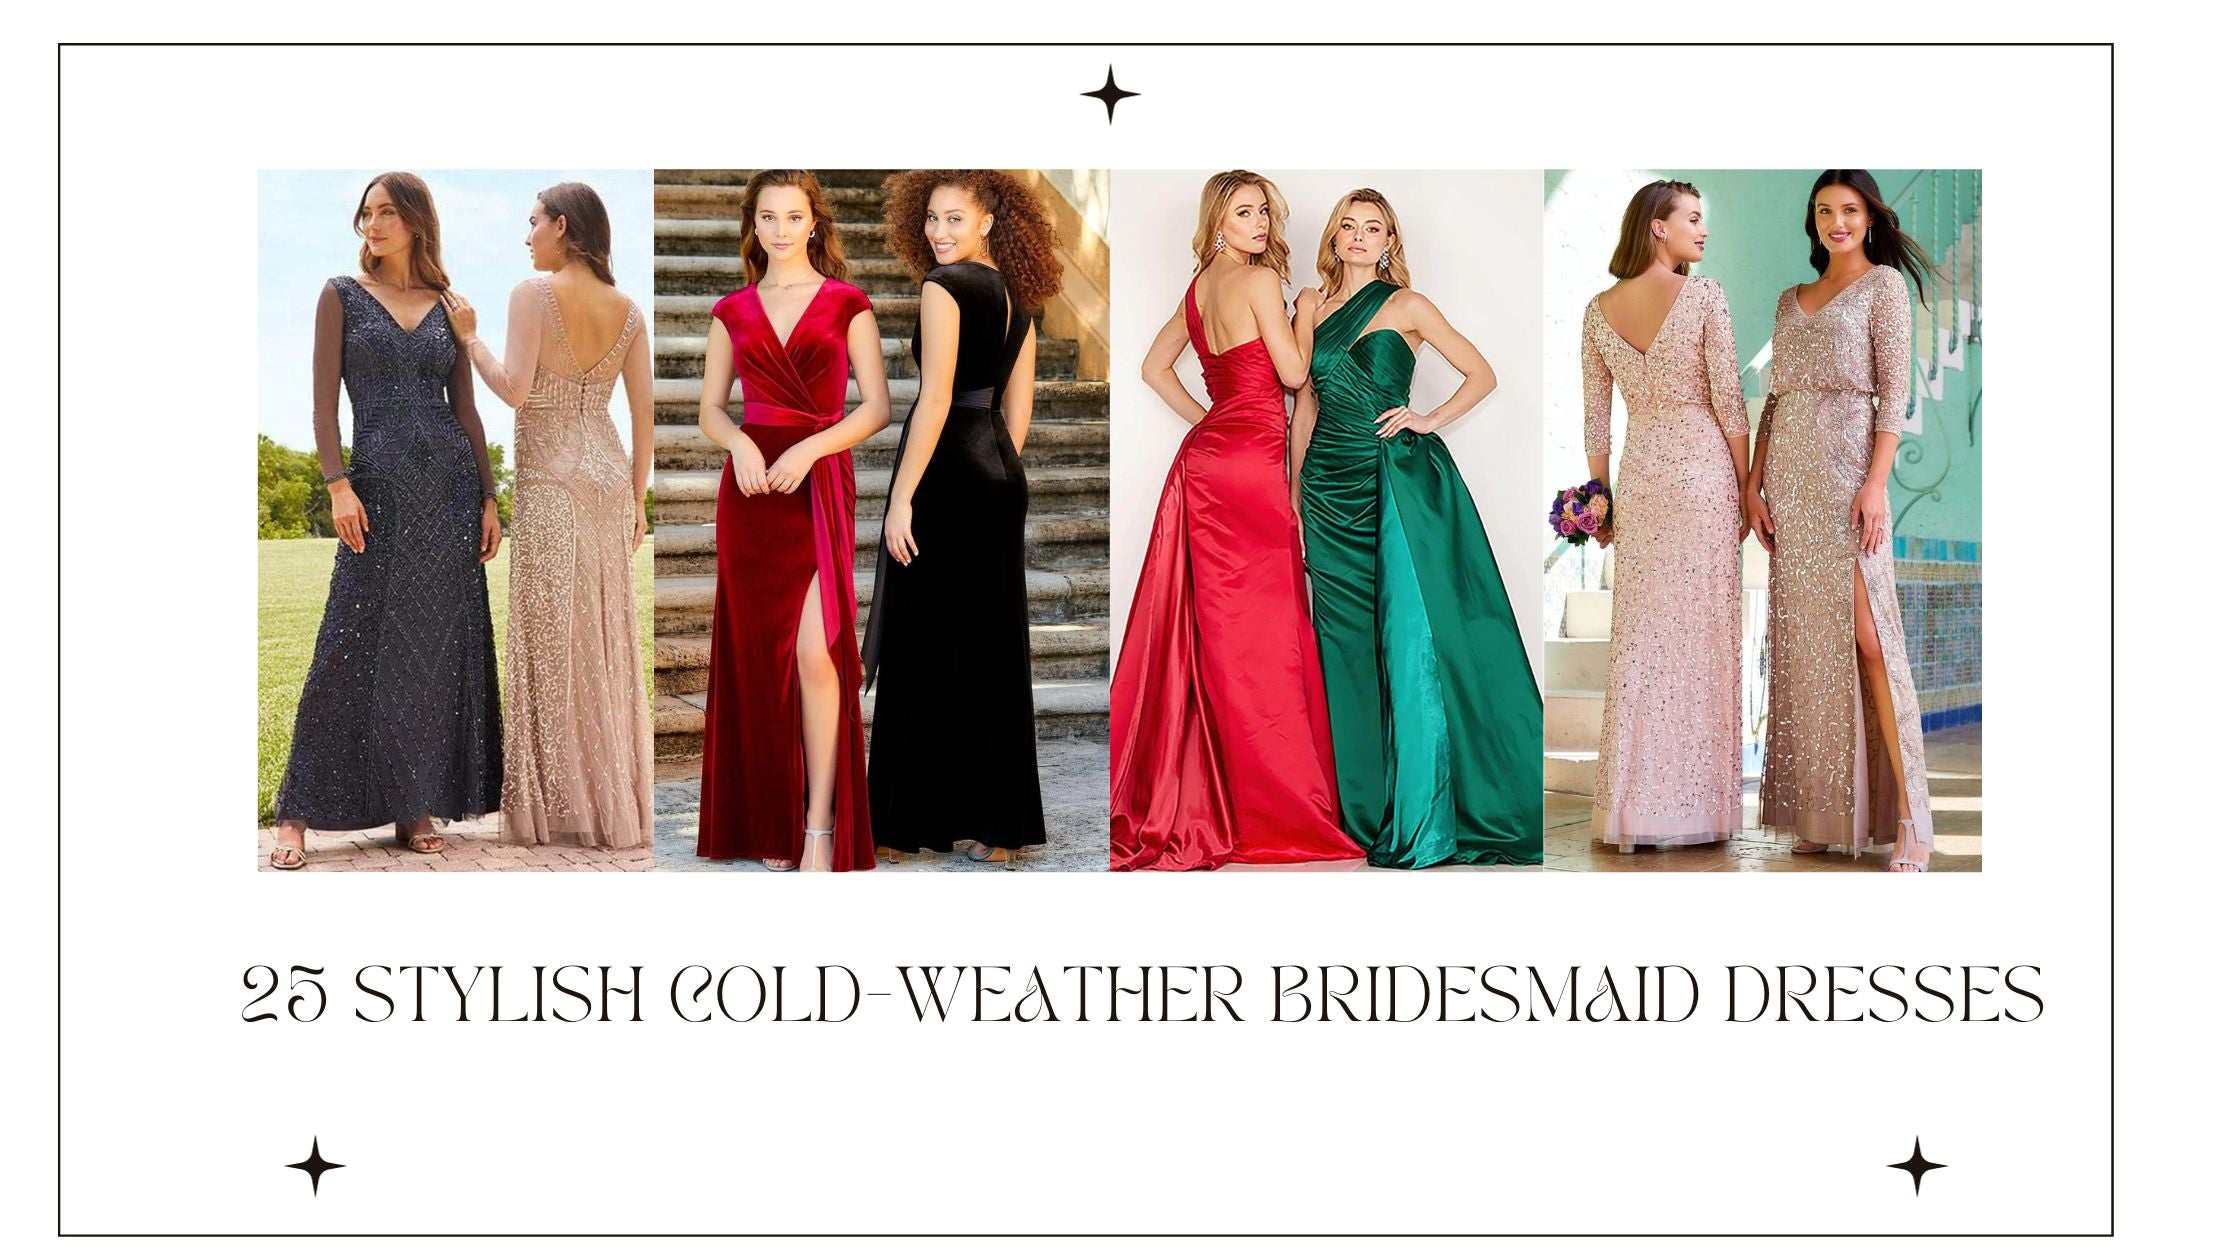 25 Beautiful Bridesmaid Dresses for a Cold-Weather Wedding